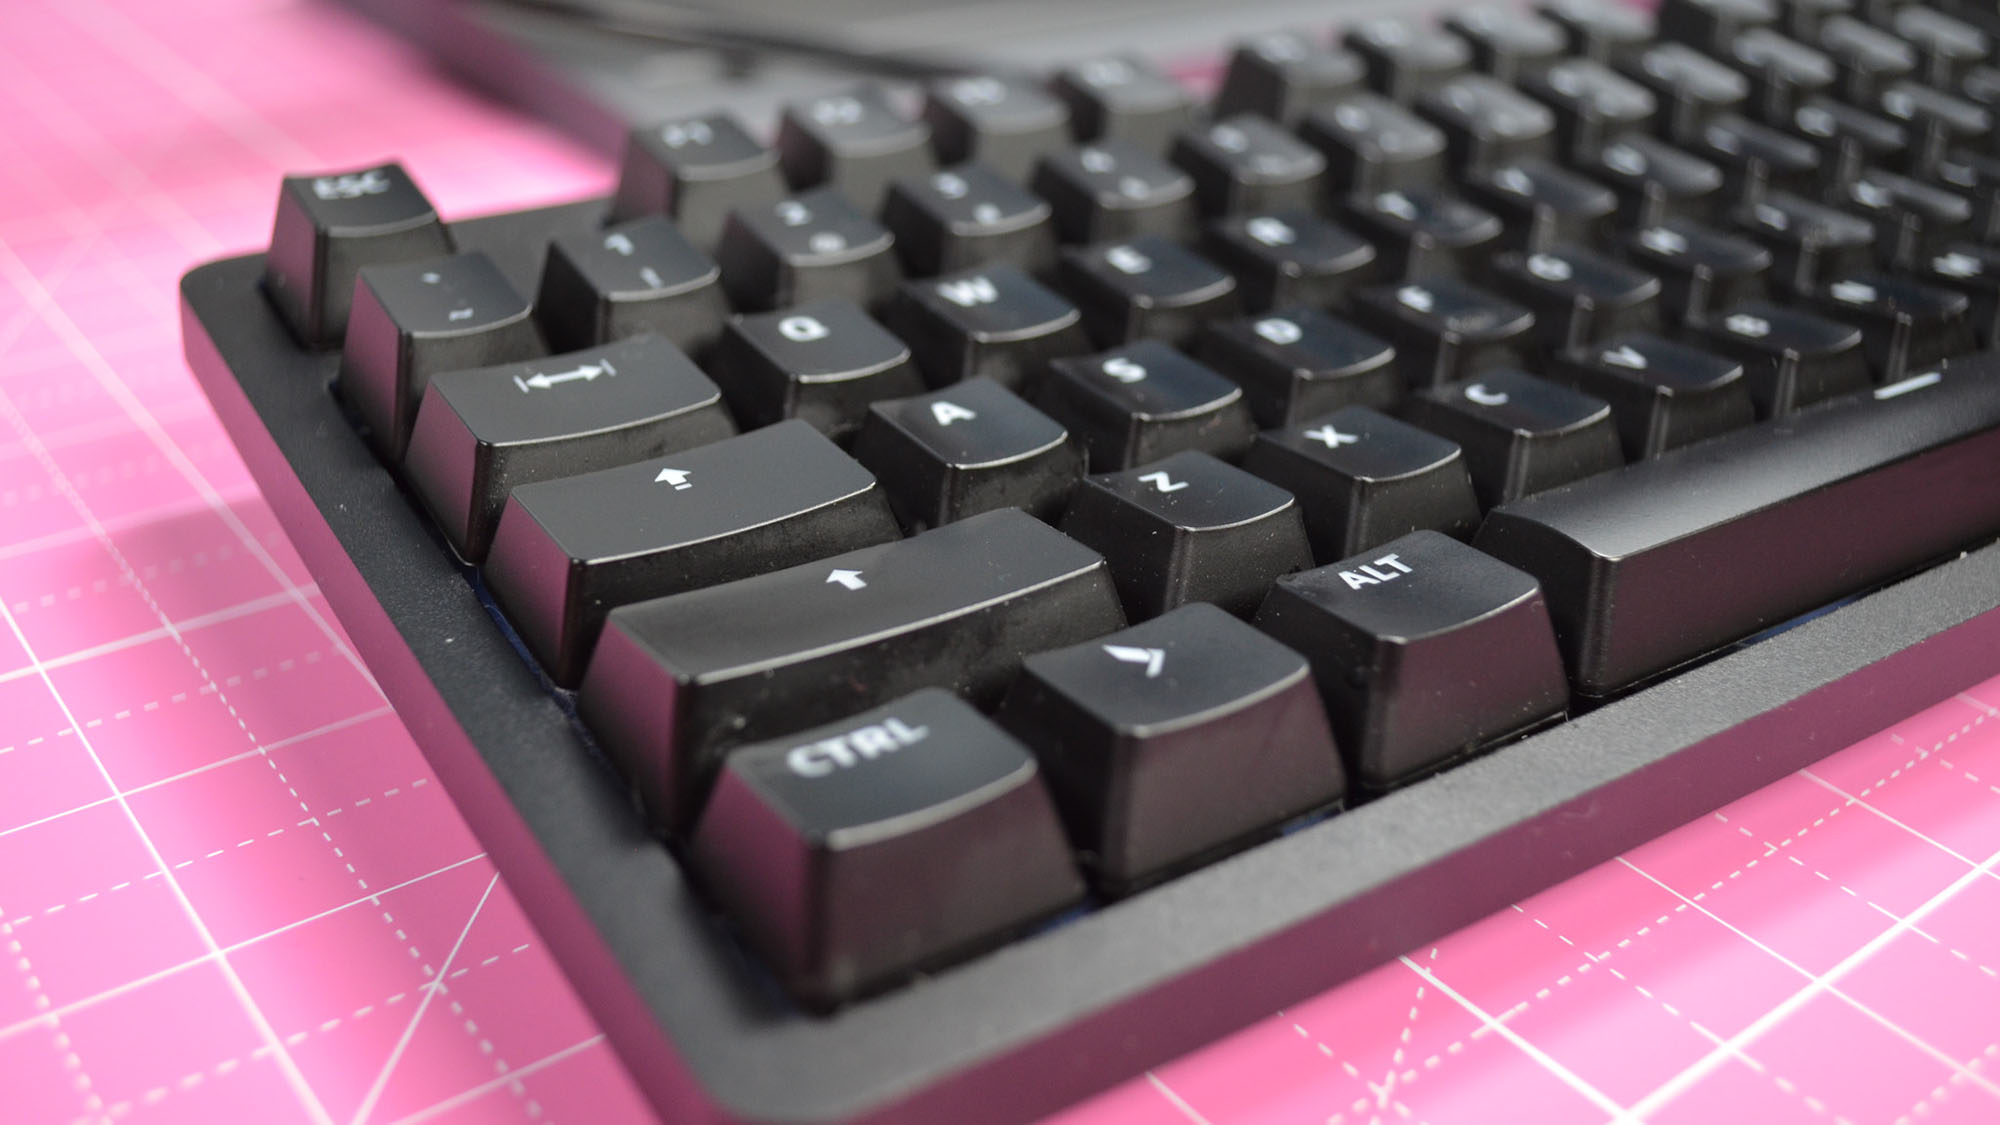 A closeup of the keycaps on the Das Keyboard 6 professional